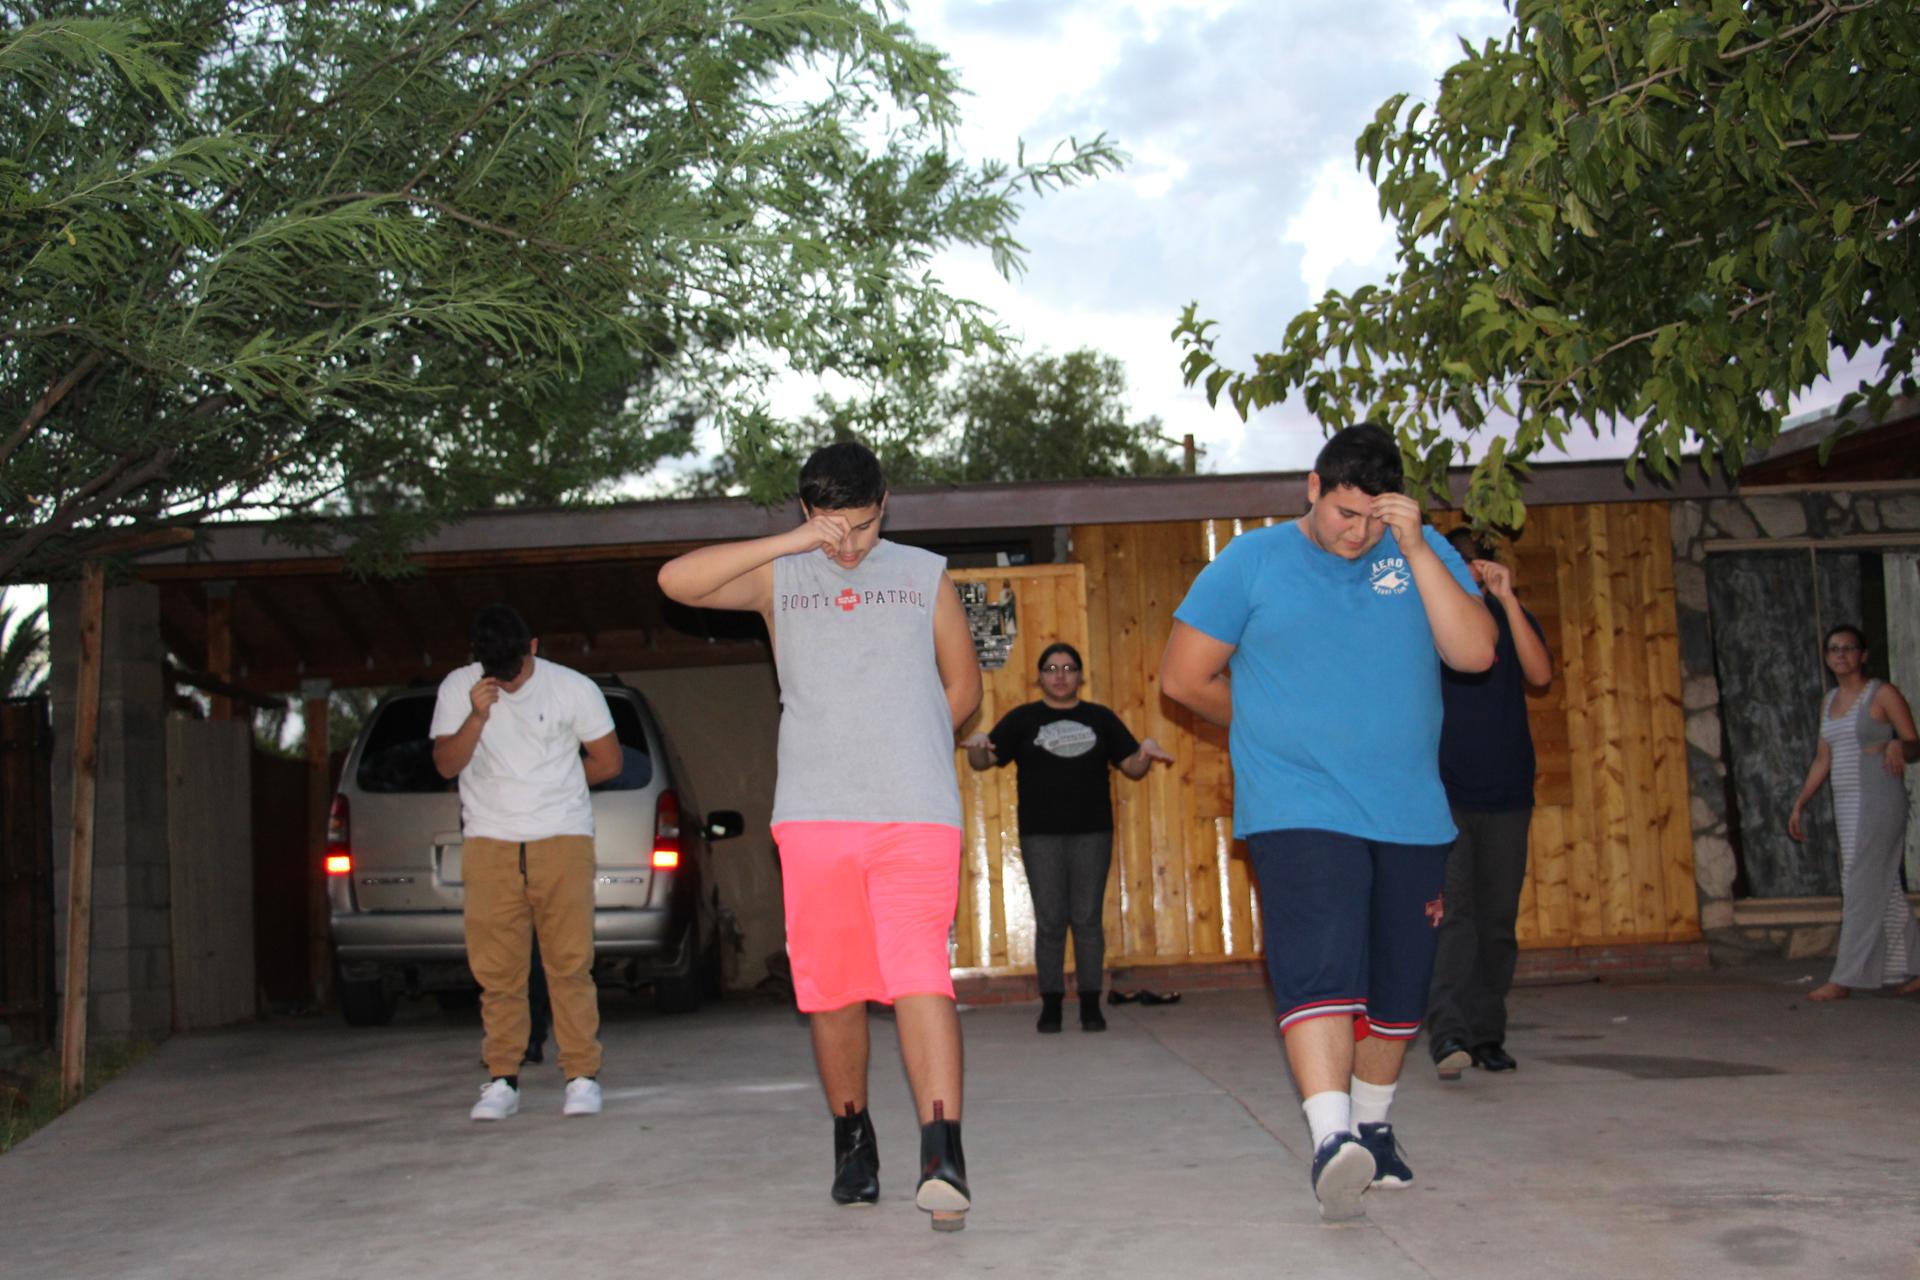 Five out of six of Kimberly's chambelanes run through their zapateado routine on a Friday night. They've been practicing since May for a September quince.